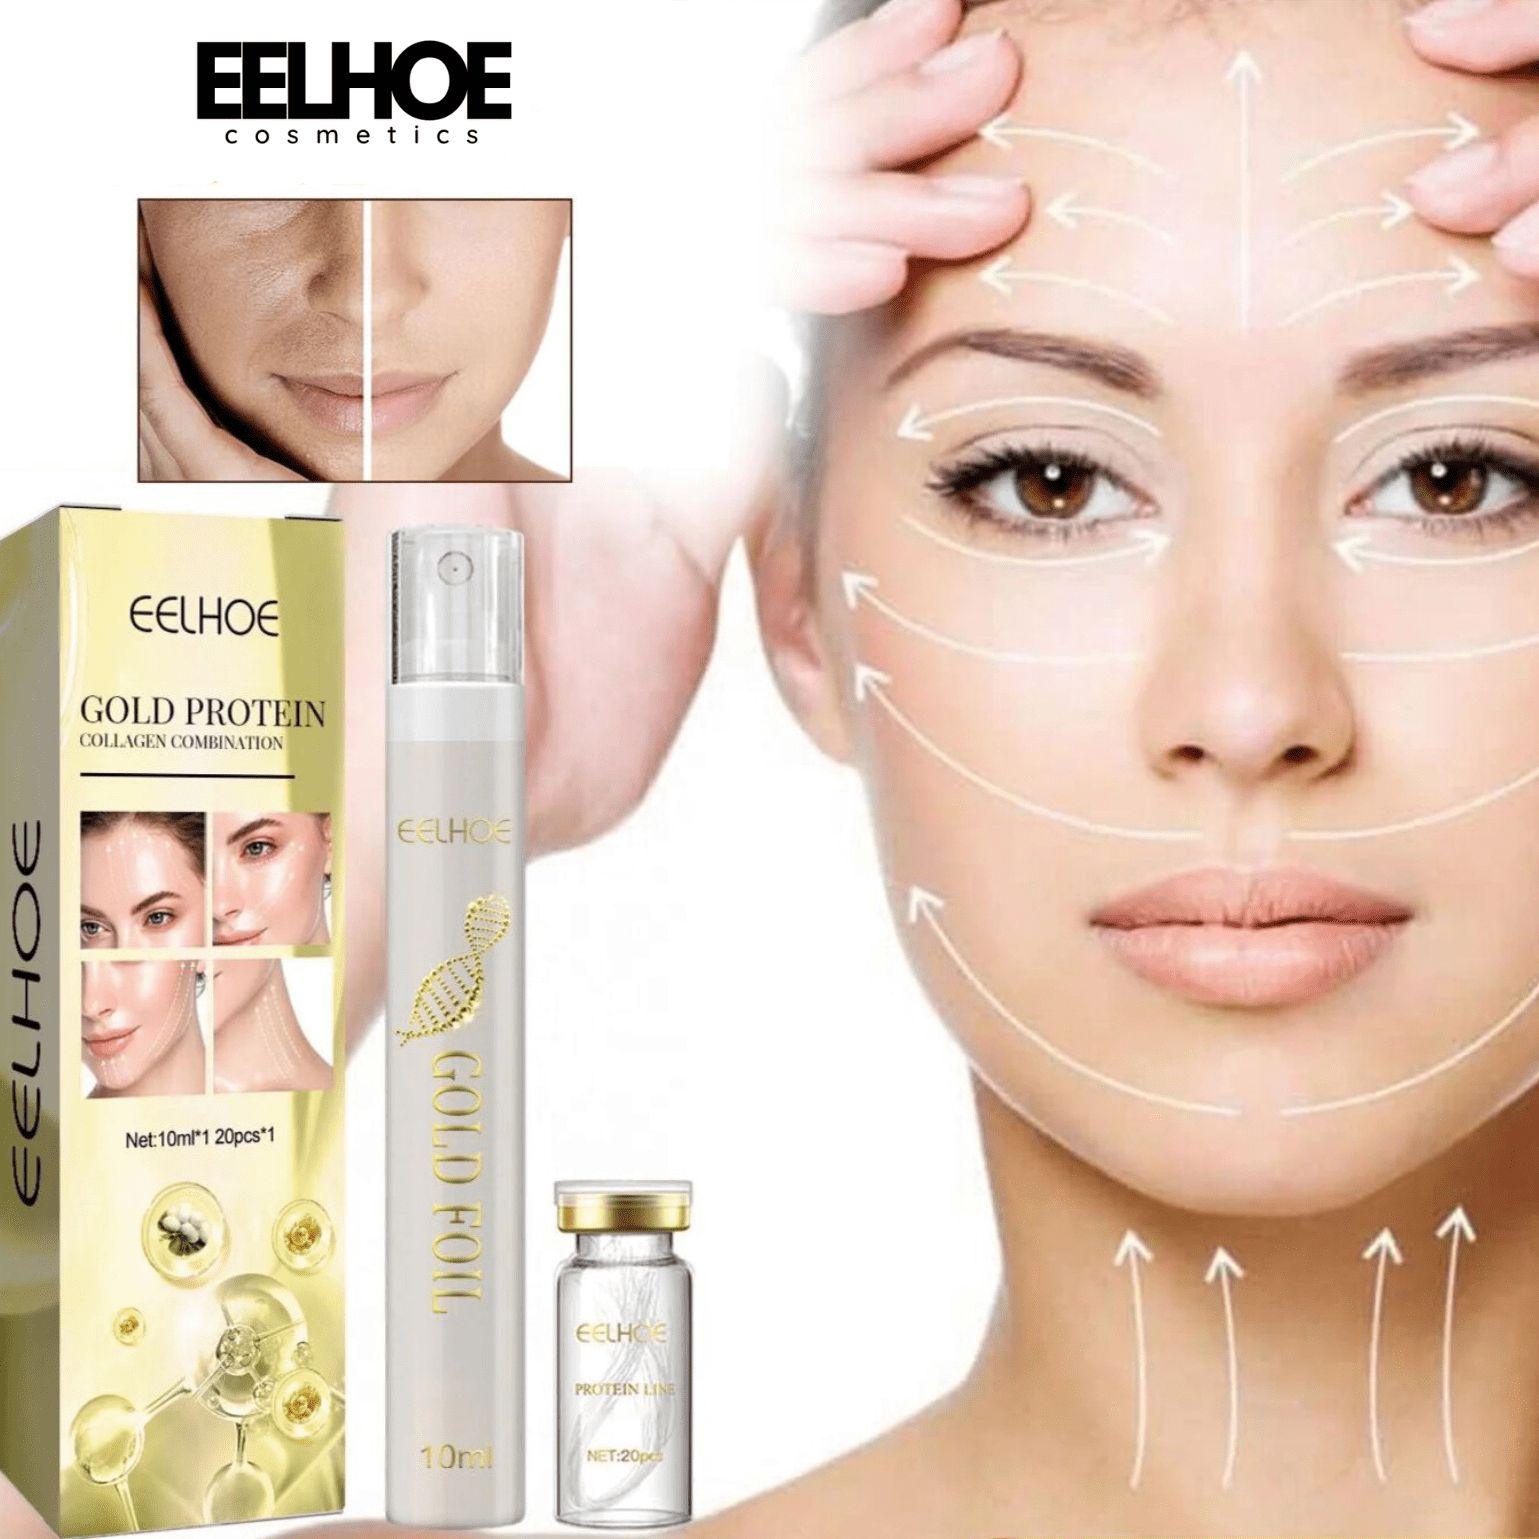 EELHOE Gold Protein Line Line Carving Facial Light Lines Lifting Care Salon And Beauty Skin Micro-carved Products Tightening 10ml+20pcs